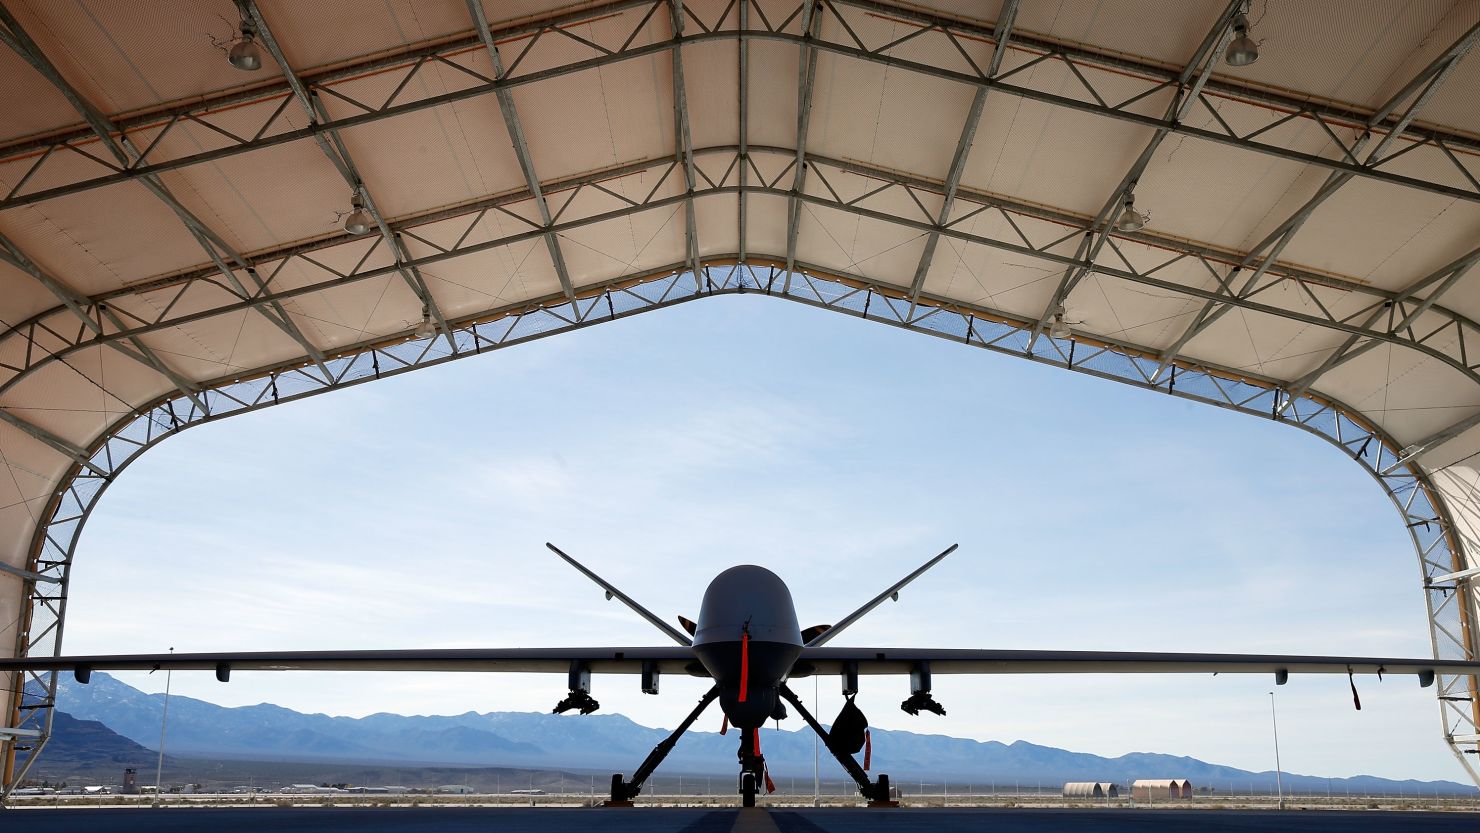 INDIAN SPRINGS, NV - NOVEMBER 17:  (EDITORS NOTE: Image has been reviewed by the U.S. Military prior to transmission.) An MQ-9 Reaper remotely piloted aircraft (RPA) is parked in an aircraft shelter at Creech Air Force Base on November 17, 2015 in Indian Springs, Nevada. The Pentagon has plans to expand combat air patrols flights by remotely piloted aircraft by as much as 50 percent over the next few years to meet an increased need for surveillance, reconnaissance and lethal airstrikes in more areas around the world.  (Photo by Isaac Brekken/Getty Images)